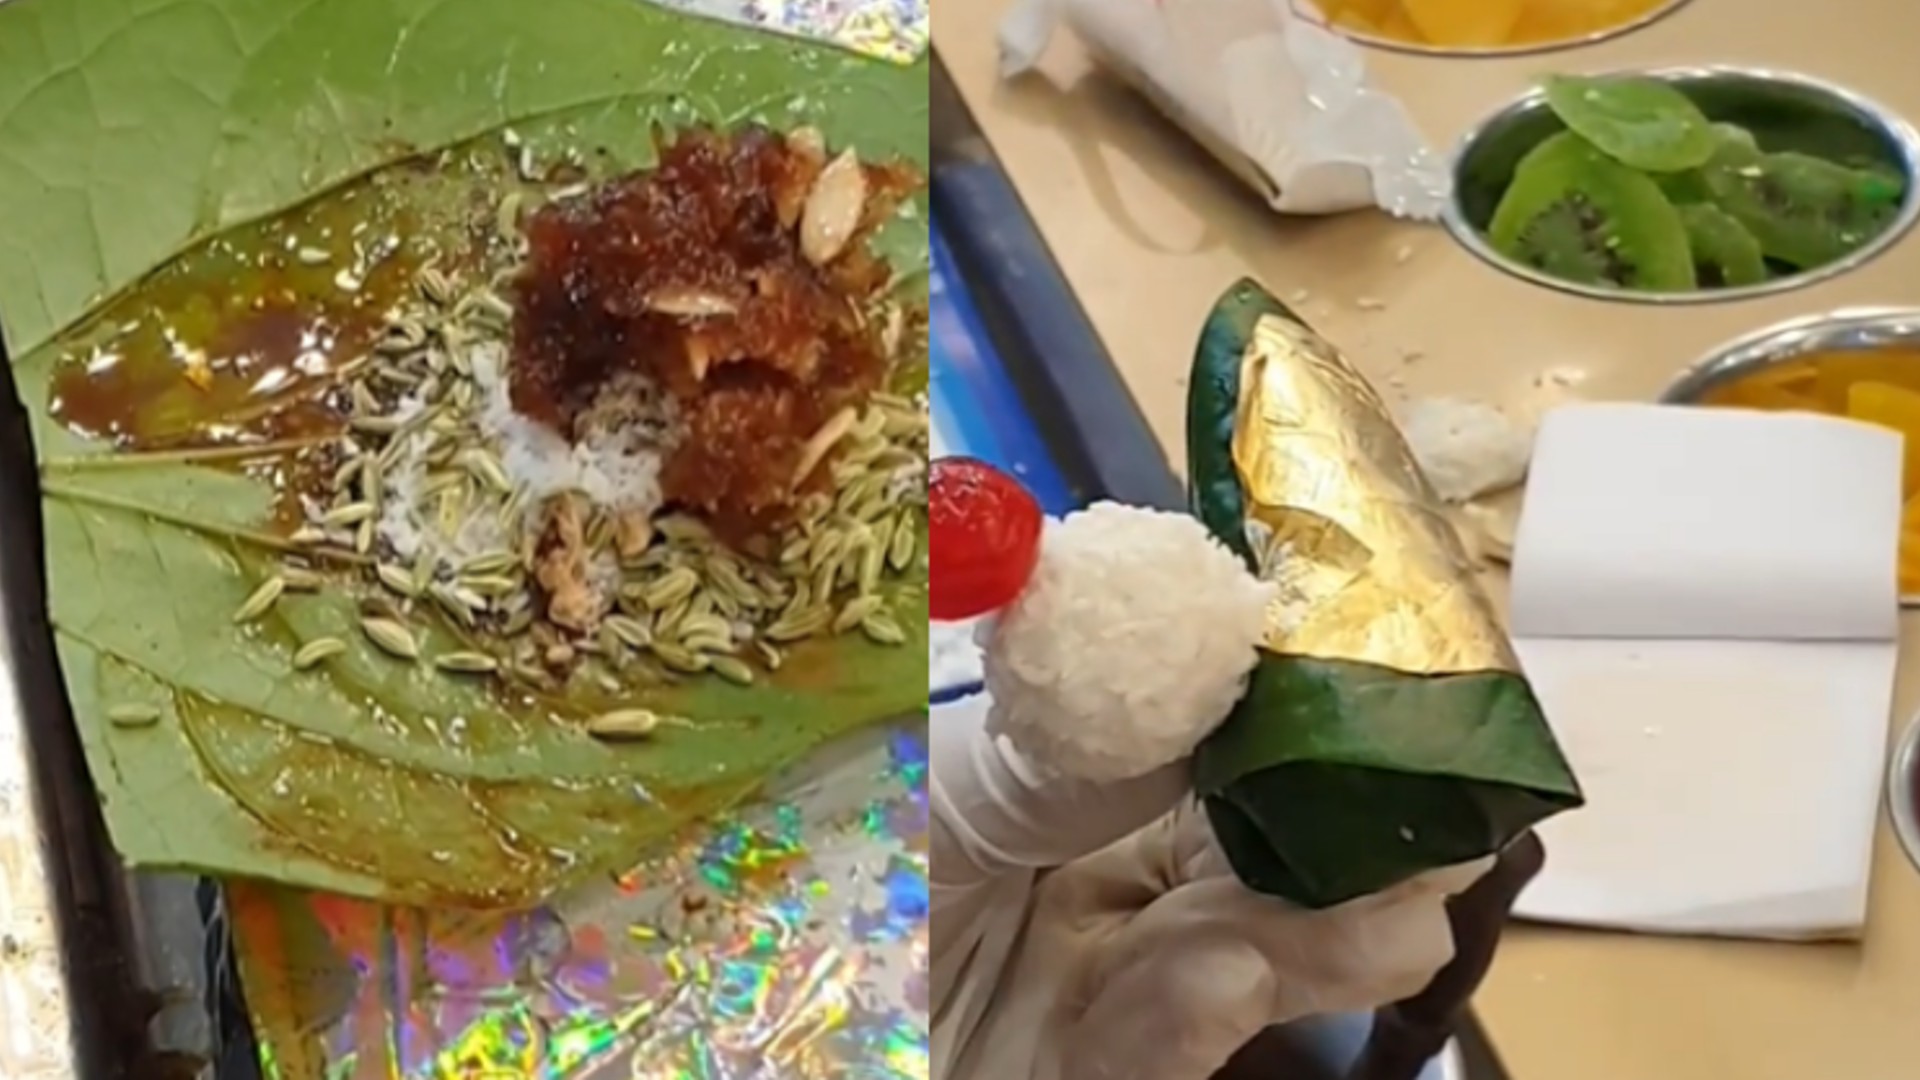 This Shop In Delhi Is Selling Gold-Plated Paan Worth ₹600 & It Is Going Viral